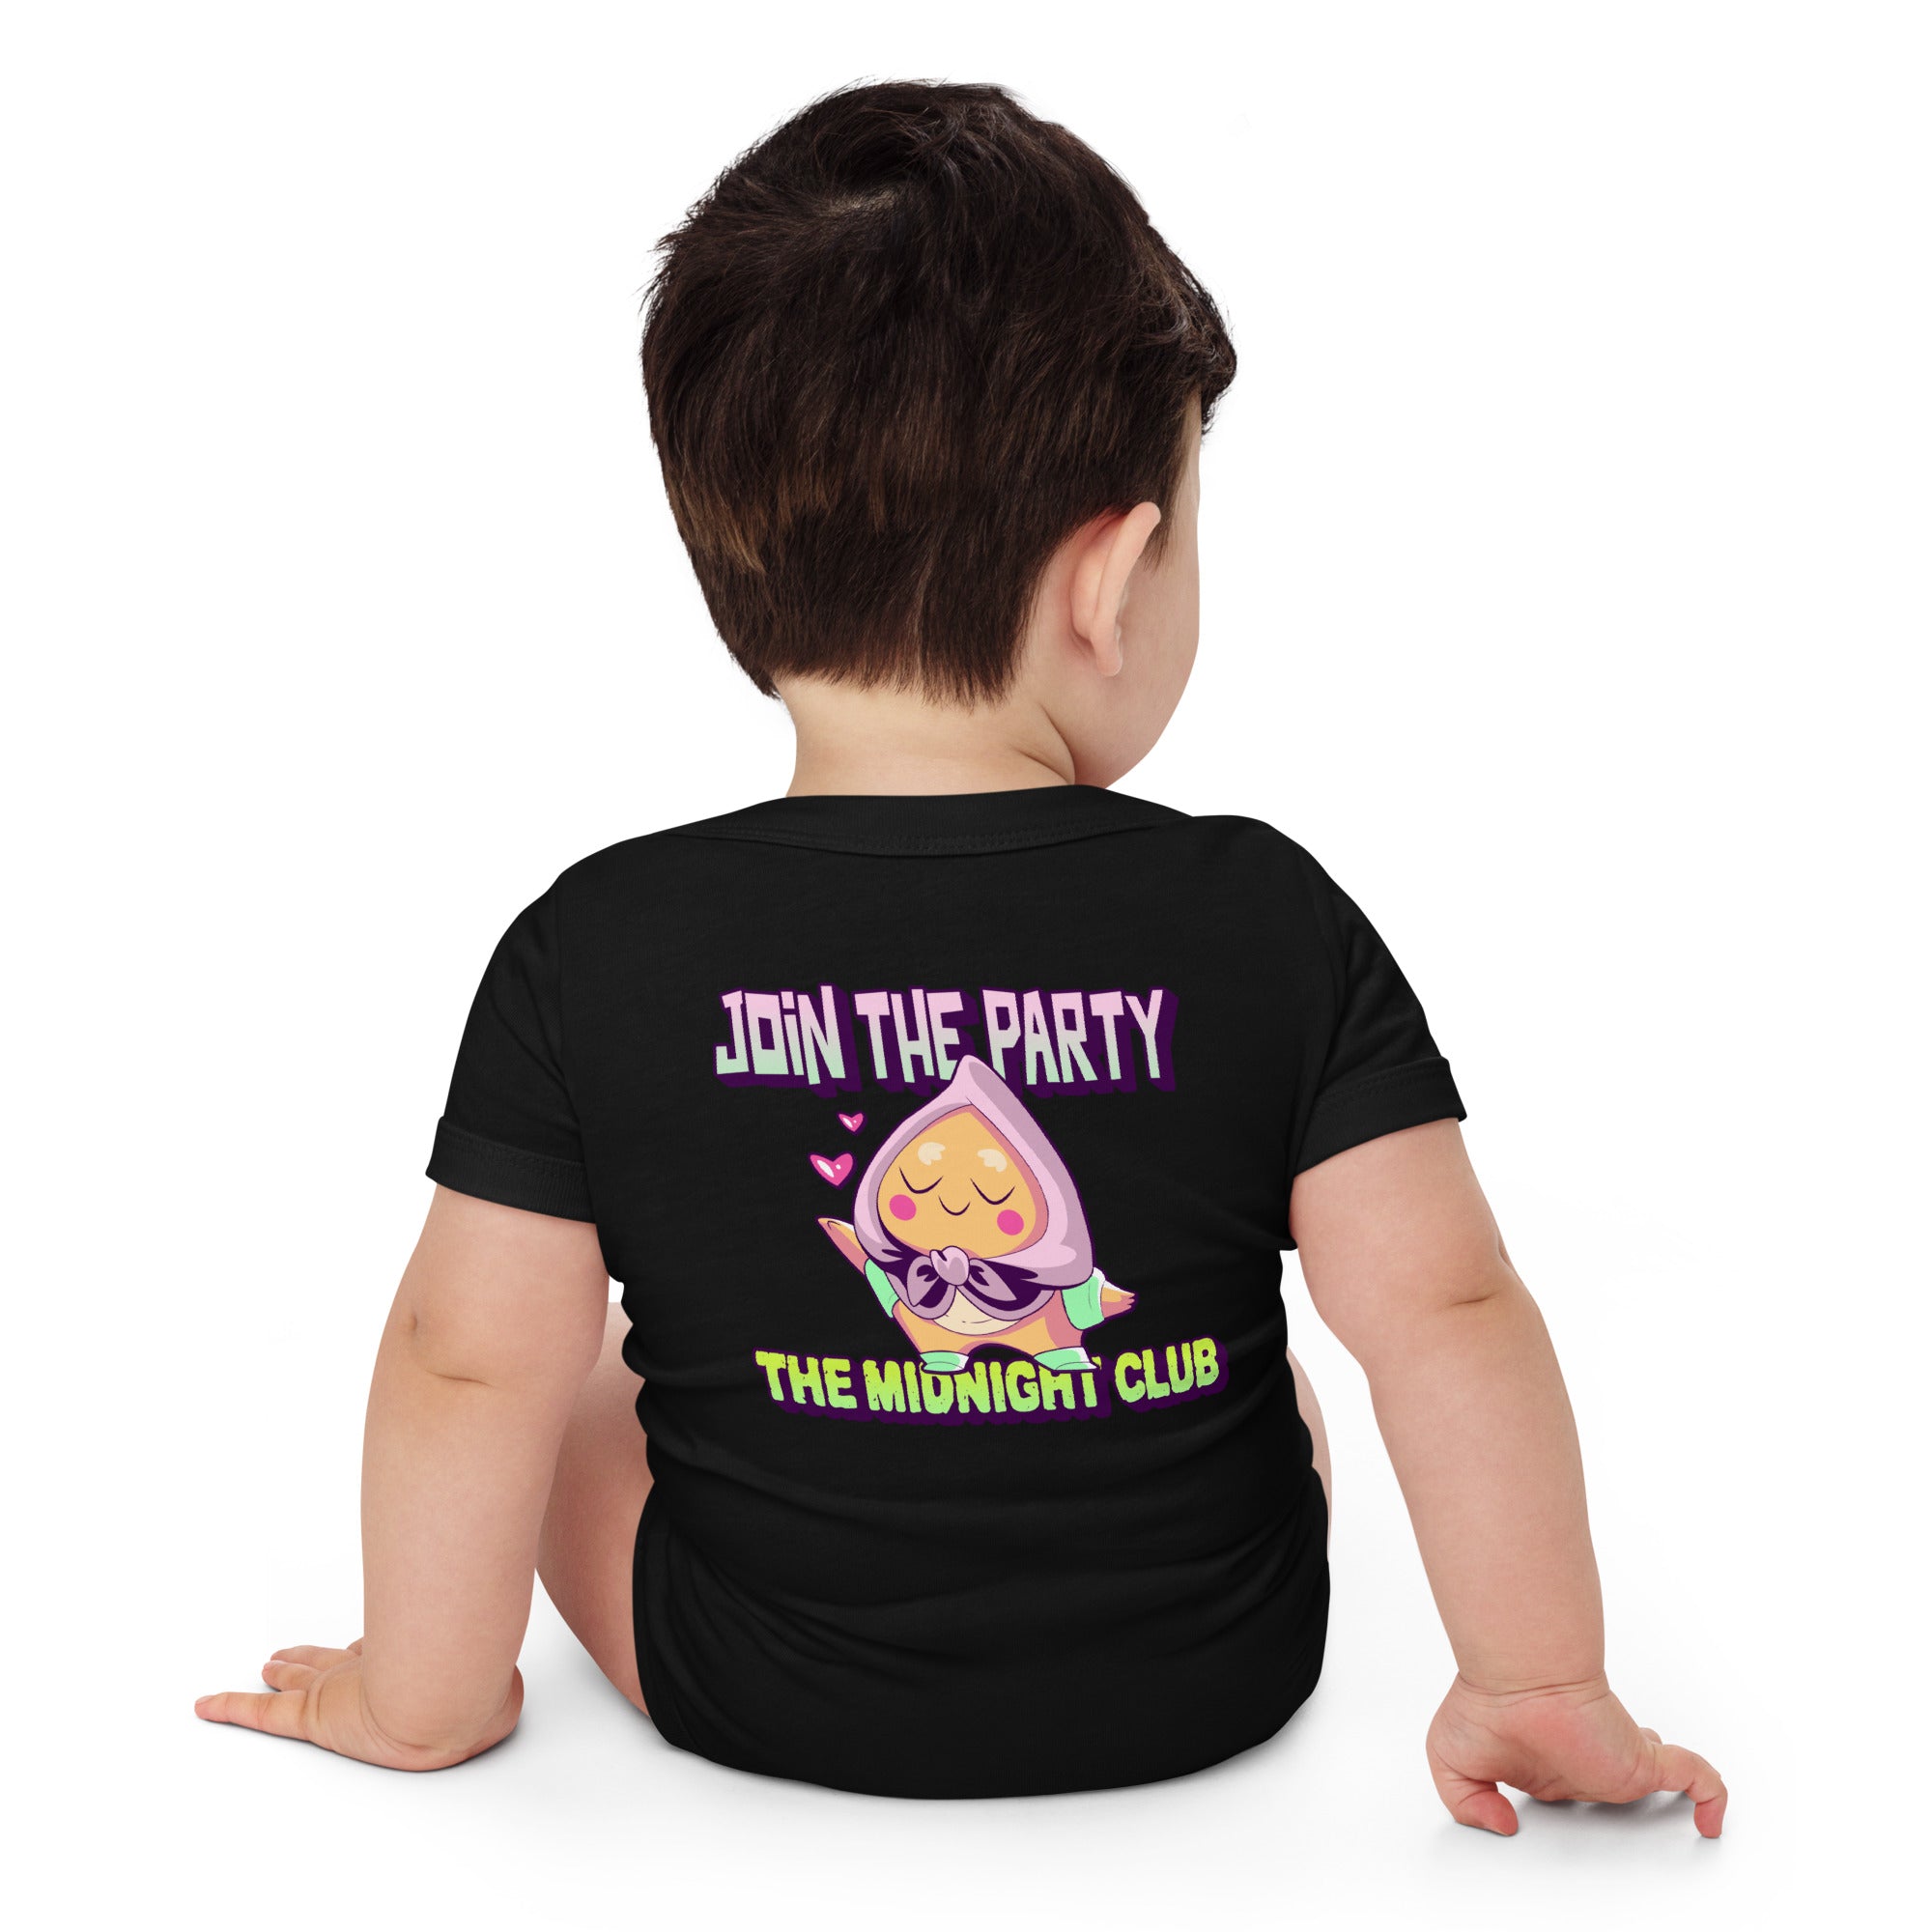 Join the party - The Midnight Club - Baby short sleeve one piece (back print)